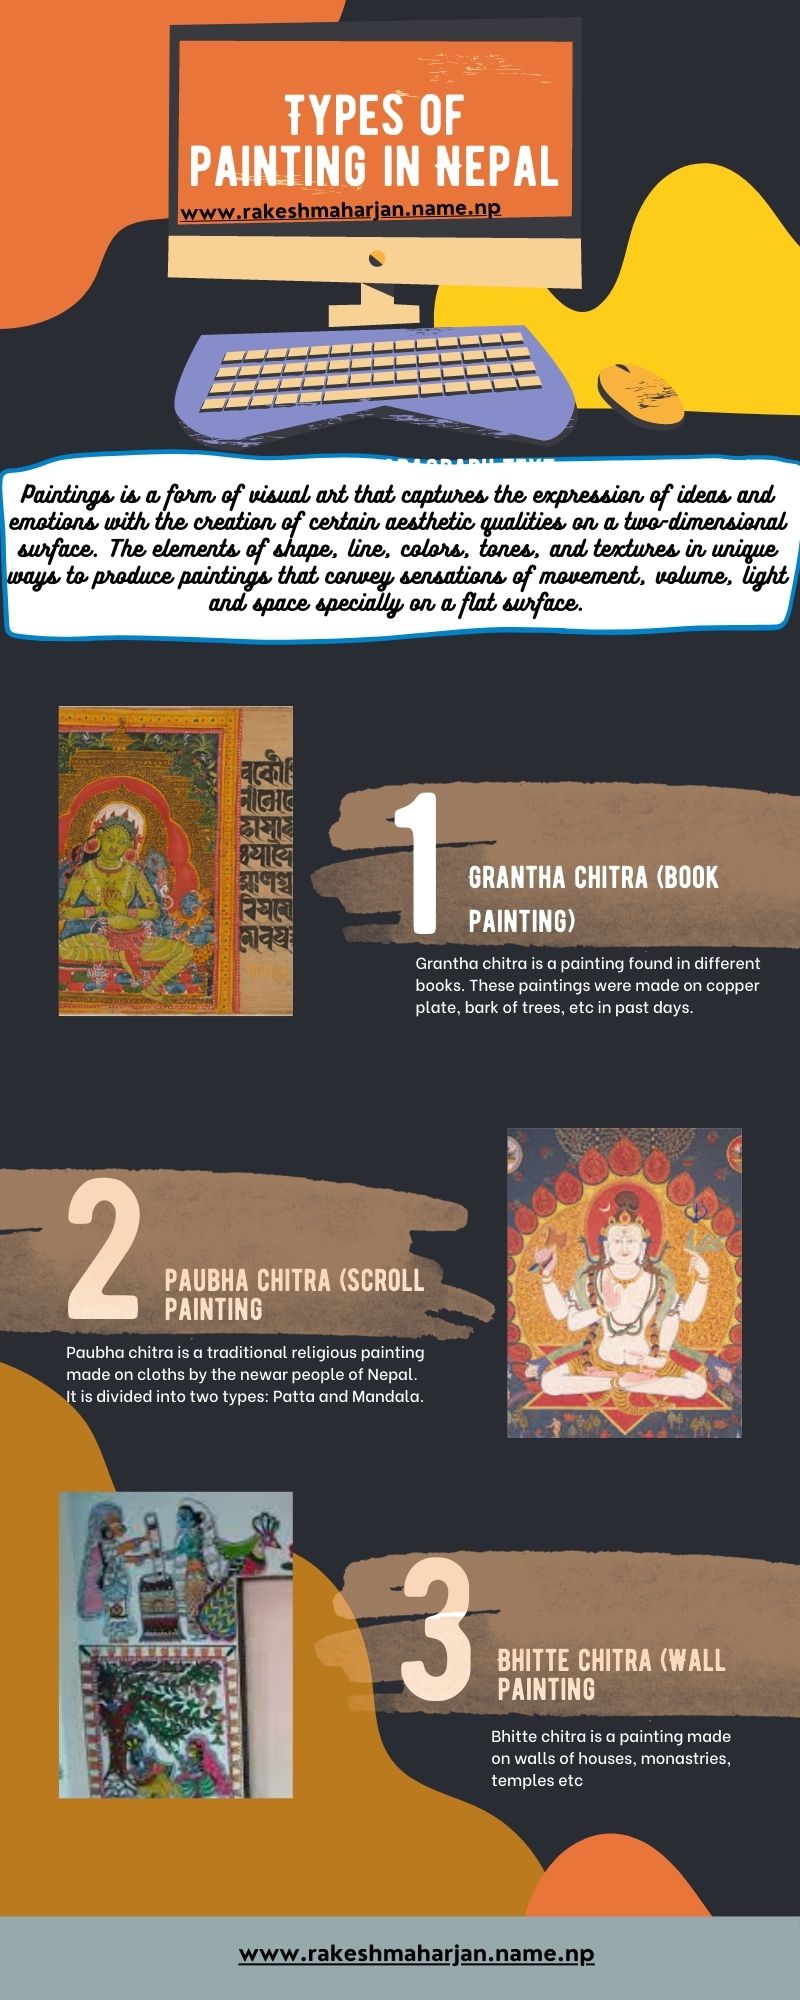 Types of painting in Nepal